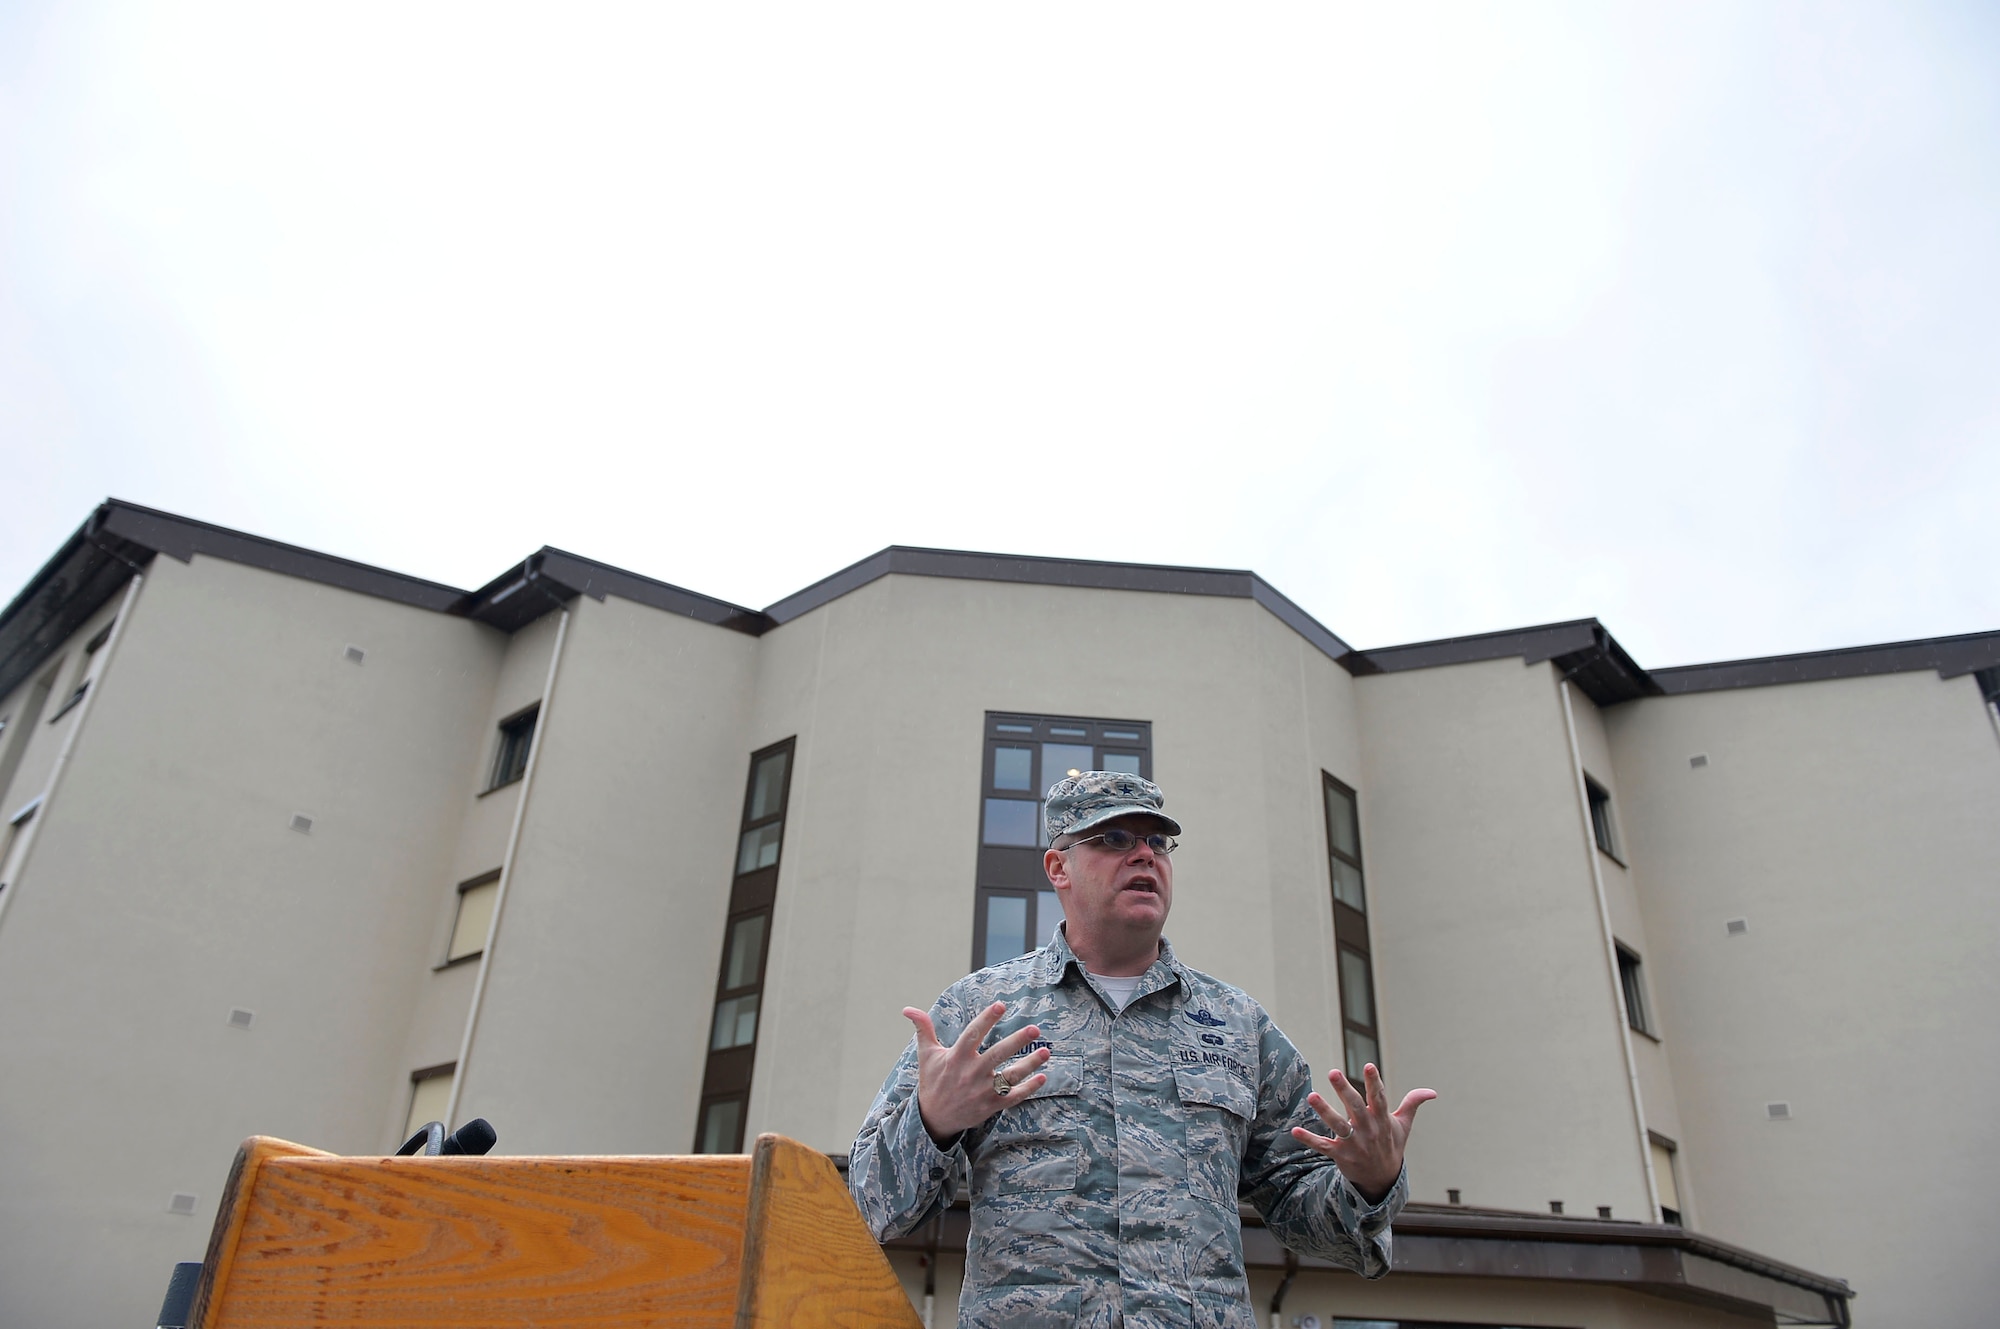 U.S. Air Force, Brig. Gen. Richard G. Moore Jr. gives remarks during a ribbon-cutting ceremony on Ramstein Air Base, Germany, March 7, 2018. The building project for dorm 2411 took more than ten years to complete if counting the planning stage. (U.S. Air Force photo by Senior Airman Joshua Magbanua)